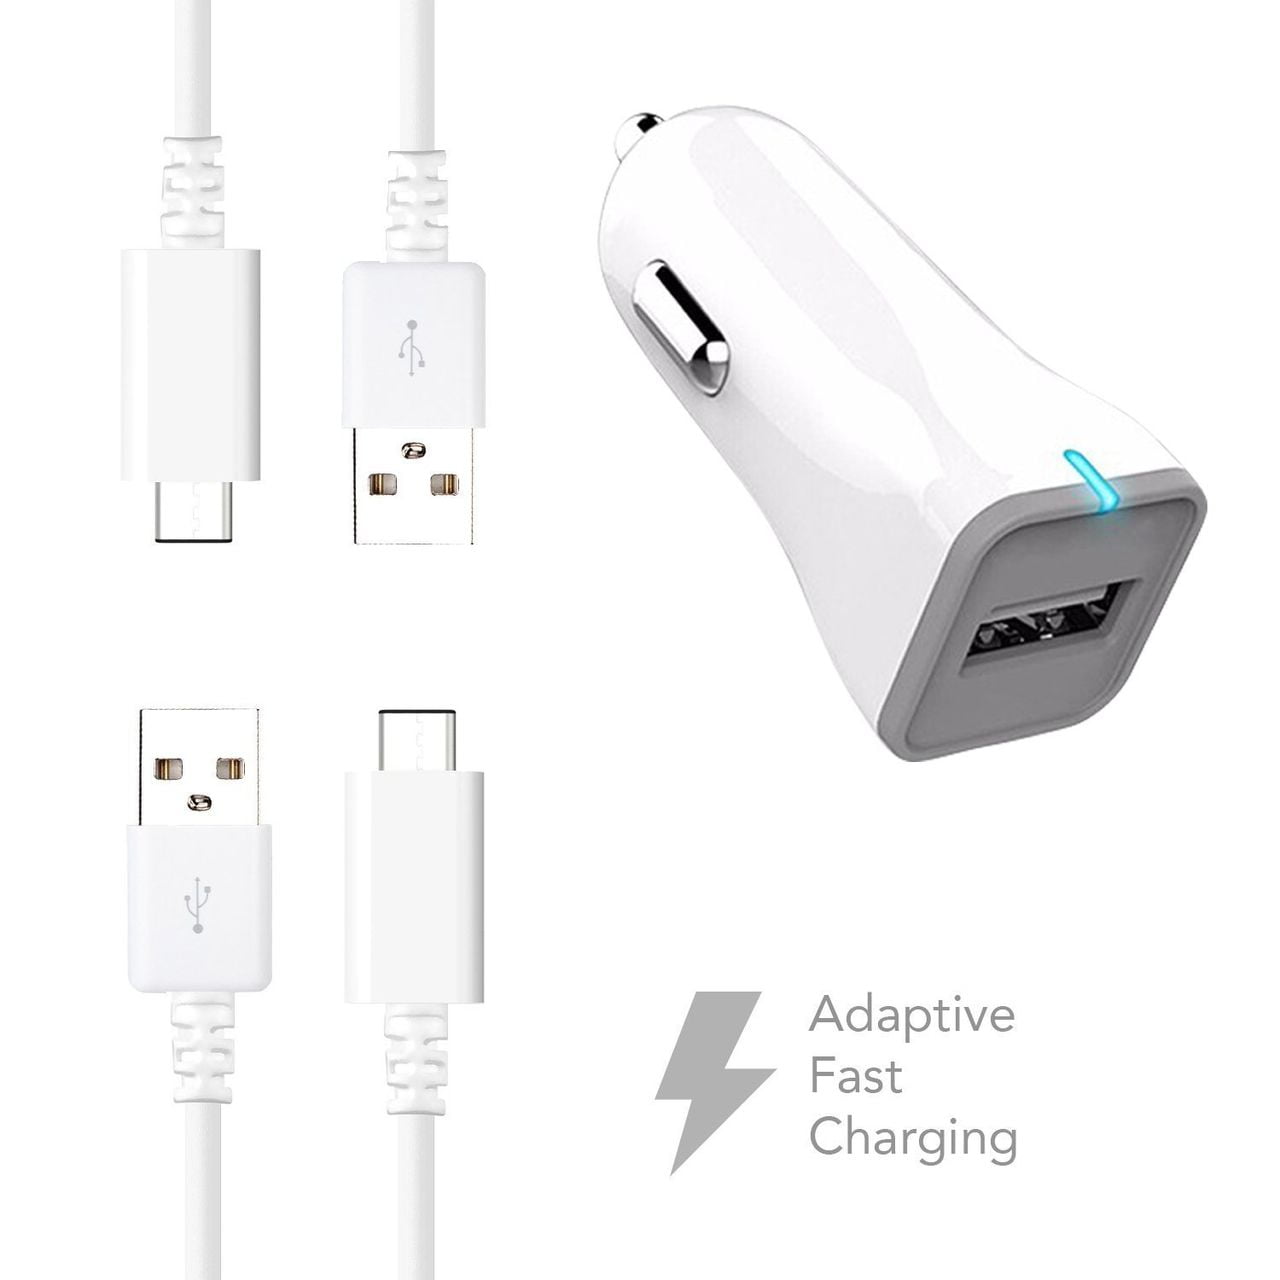 White Adaptive Fast 15W Kit for Huawei NXT-TL00 with Quick Charge Wall+Car+MicroUSB Cable gives 2x faster charging! 